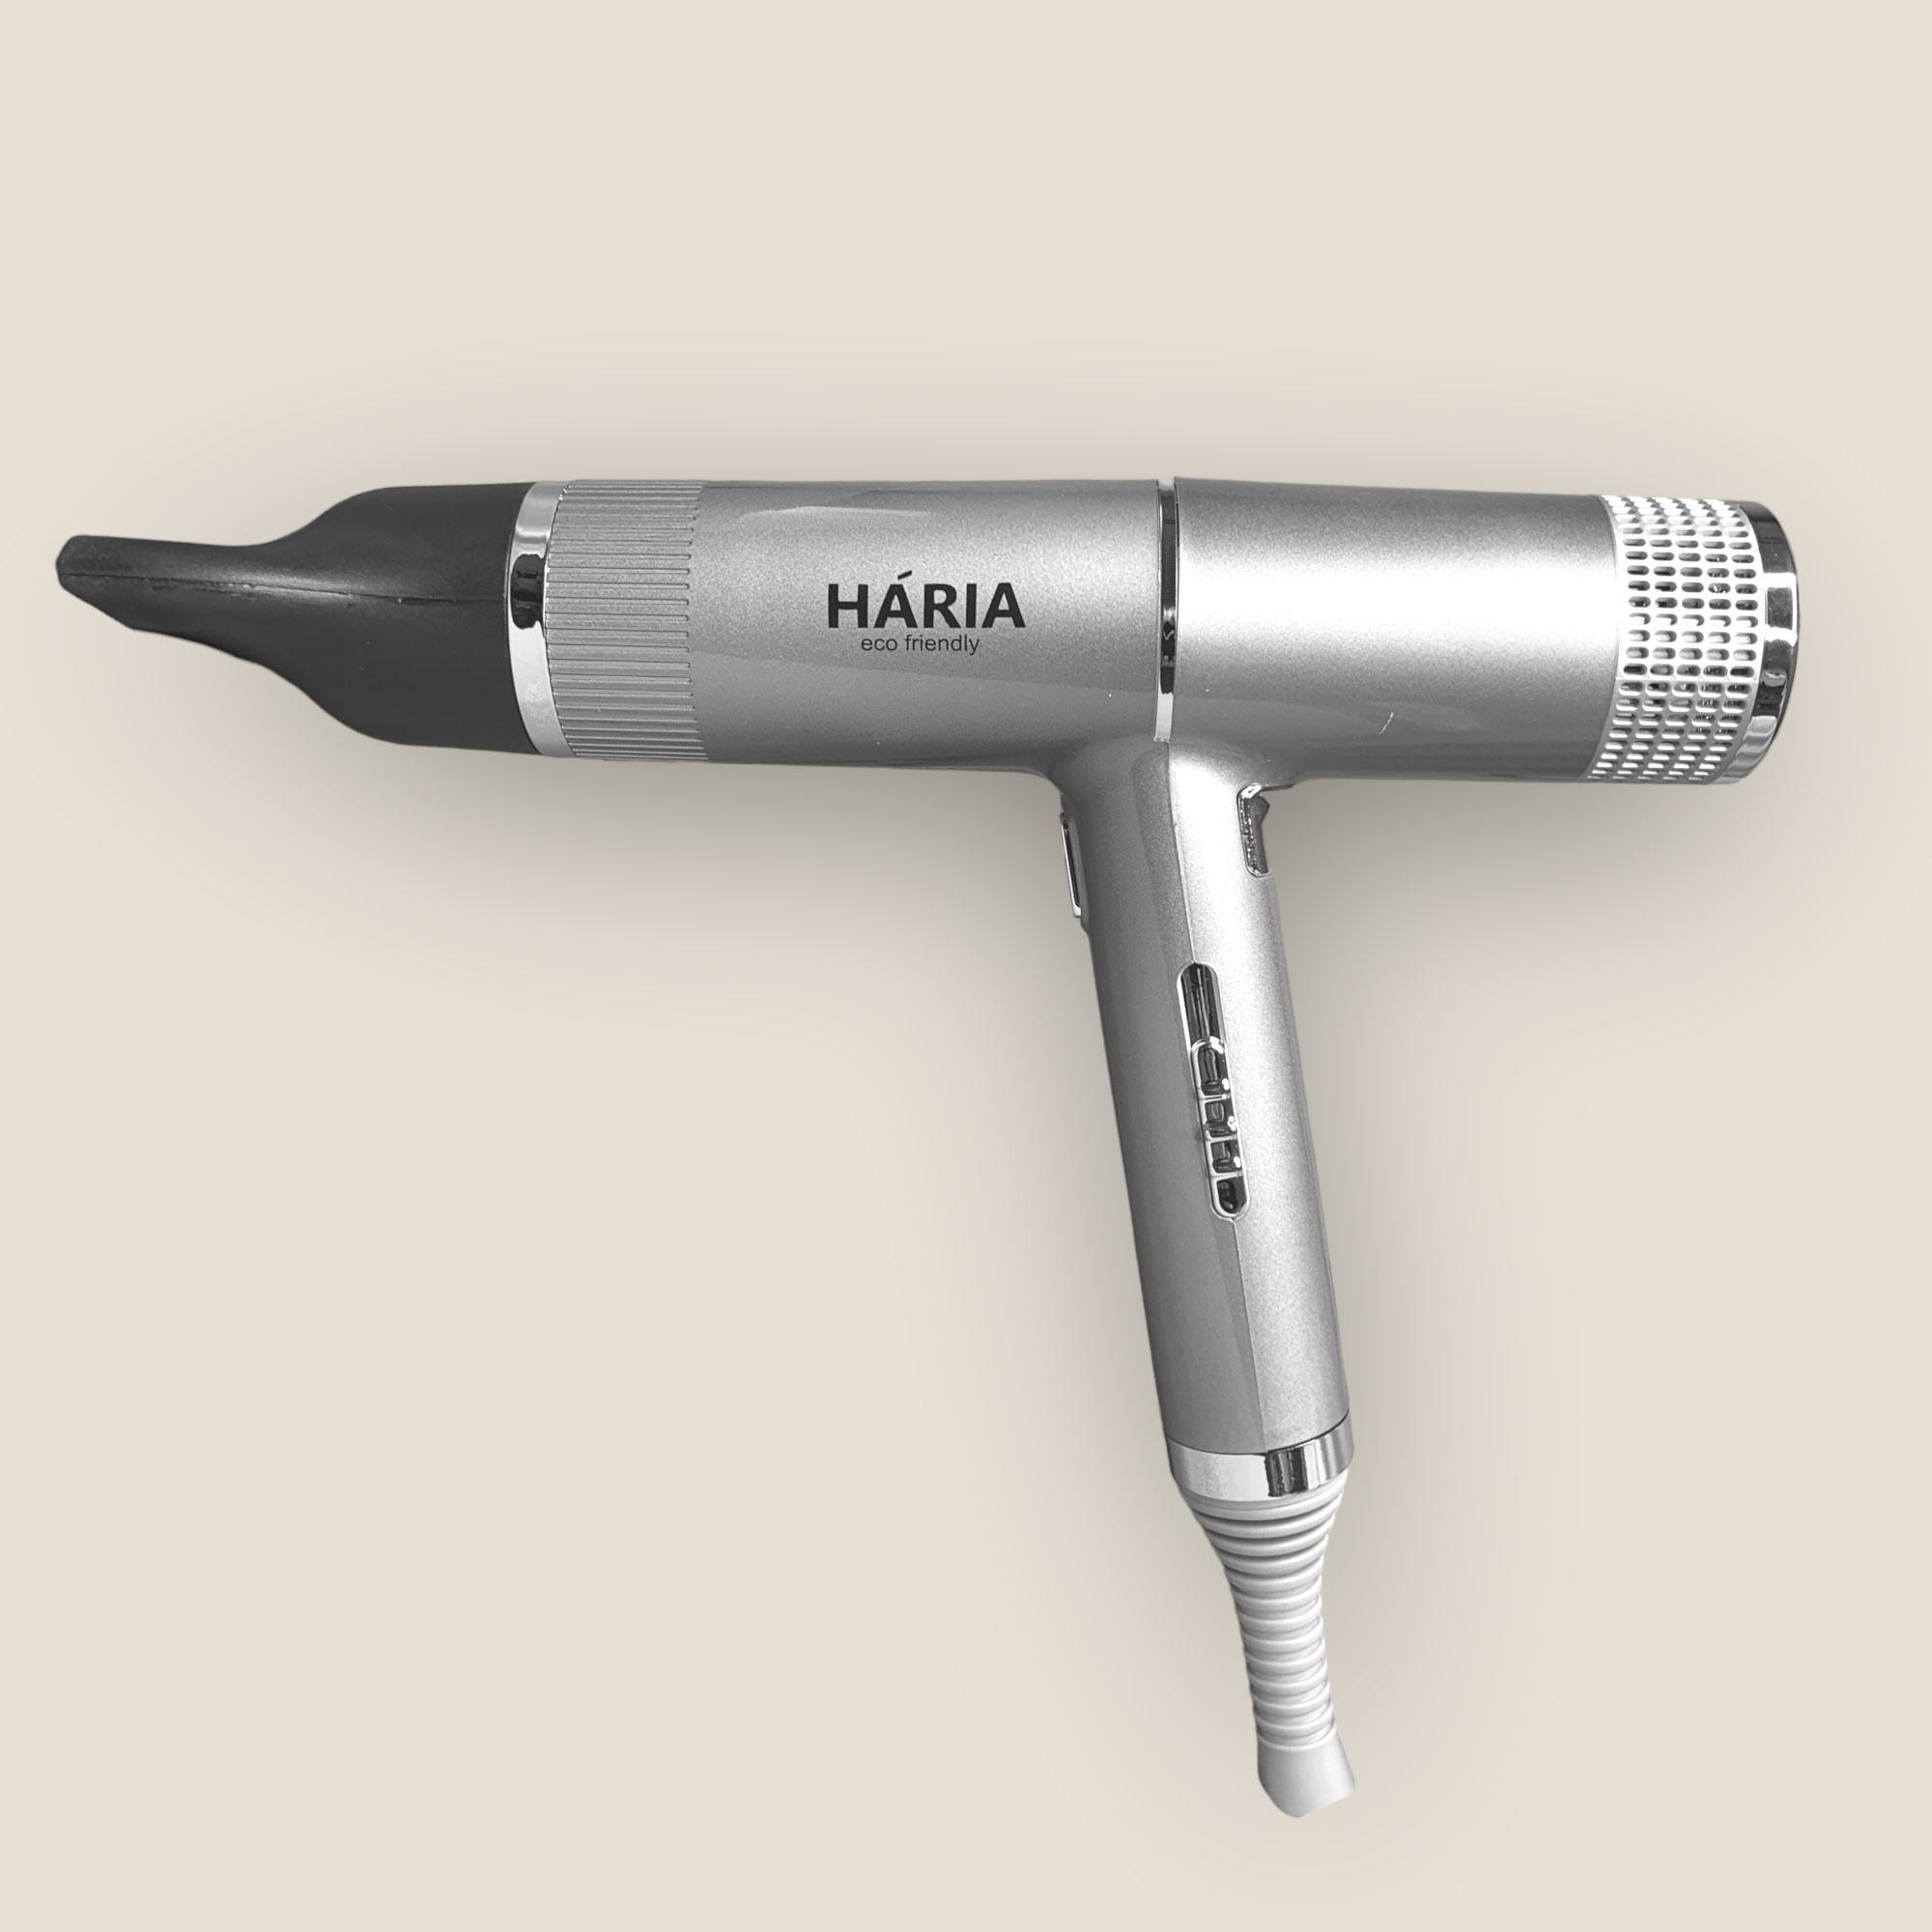 Haria eco-friendly Professional Hairdryer